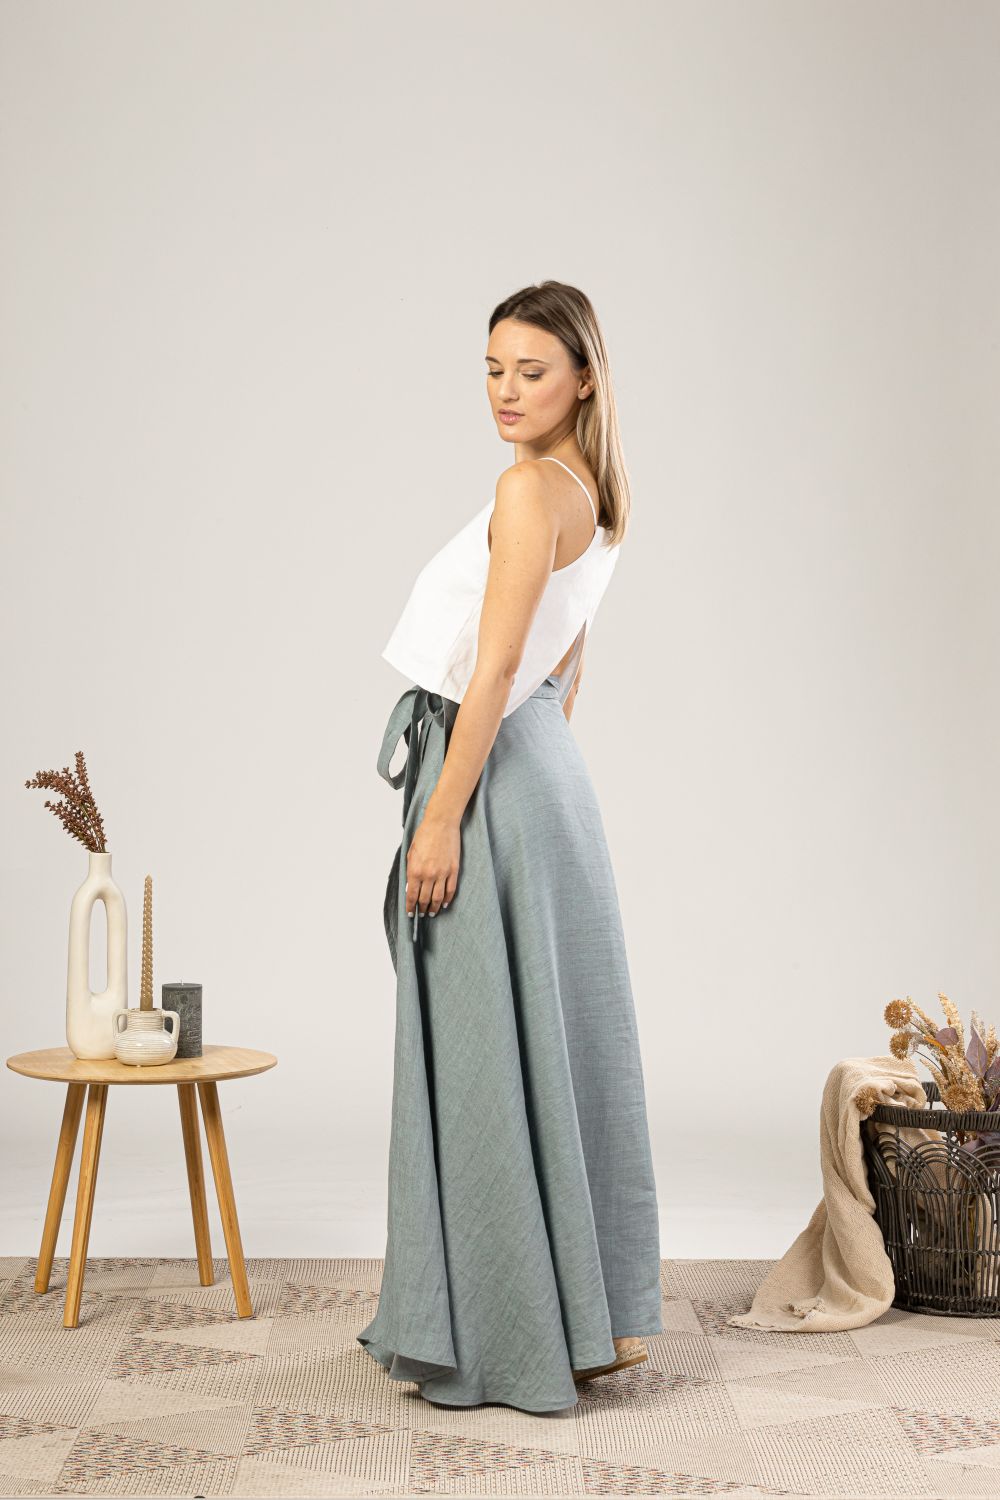 Dusty Blue Linen Wrap Maxi Skirt for hot sunny days - from NikkaPlace | Effortless fashion for easy living